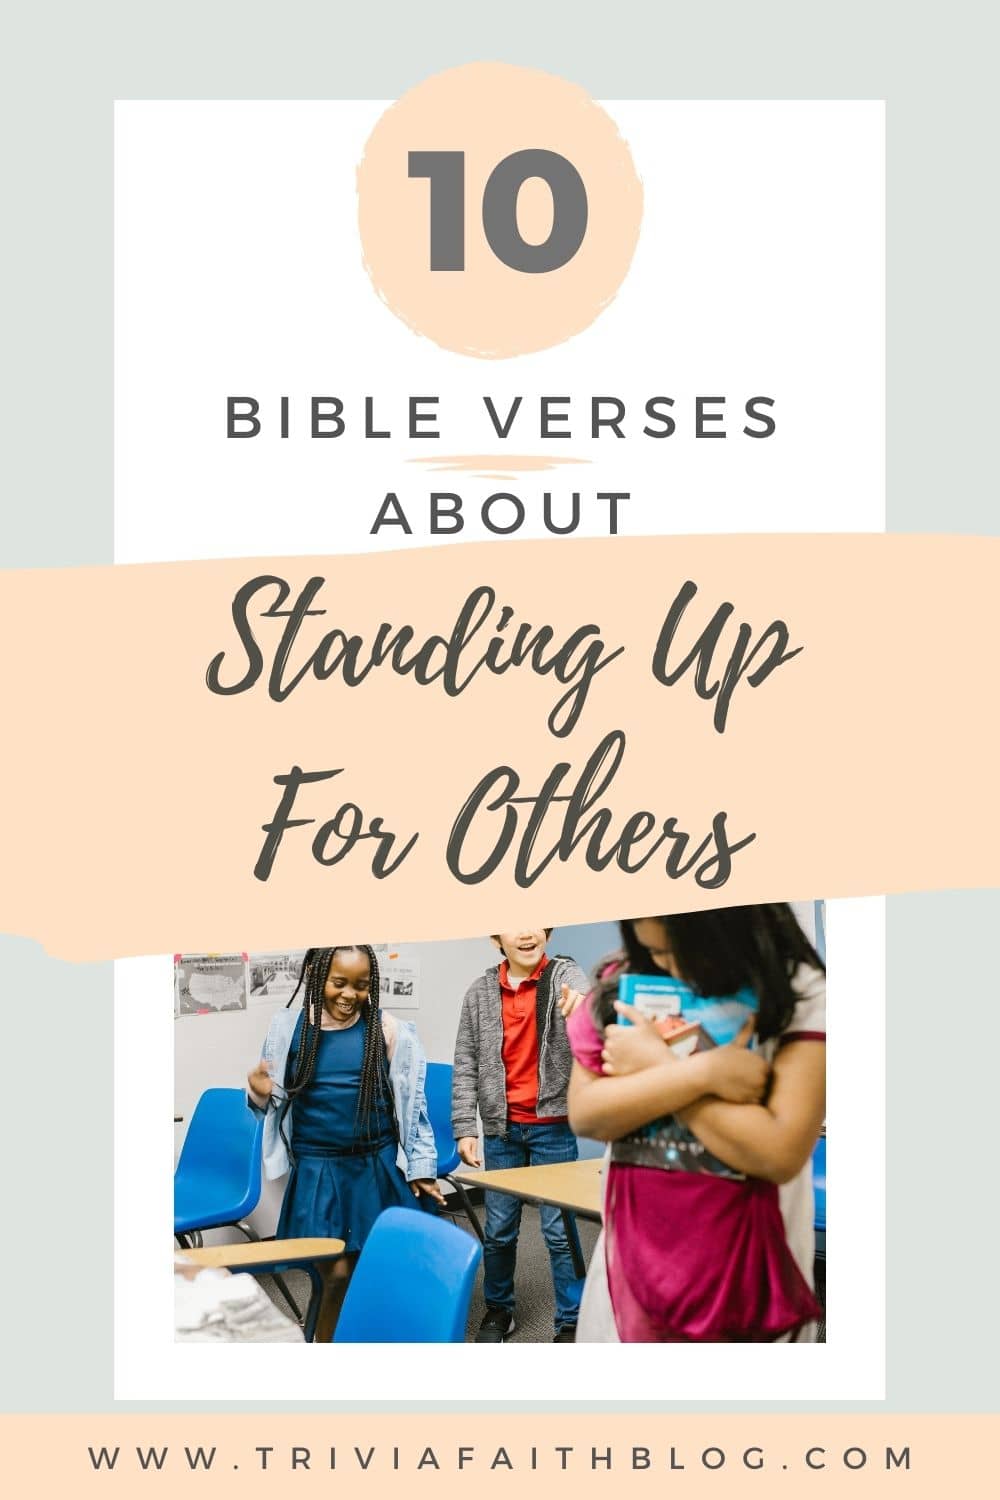 Uplifting Bible Verses About Speaking Up For Others